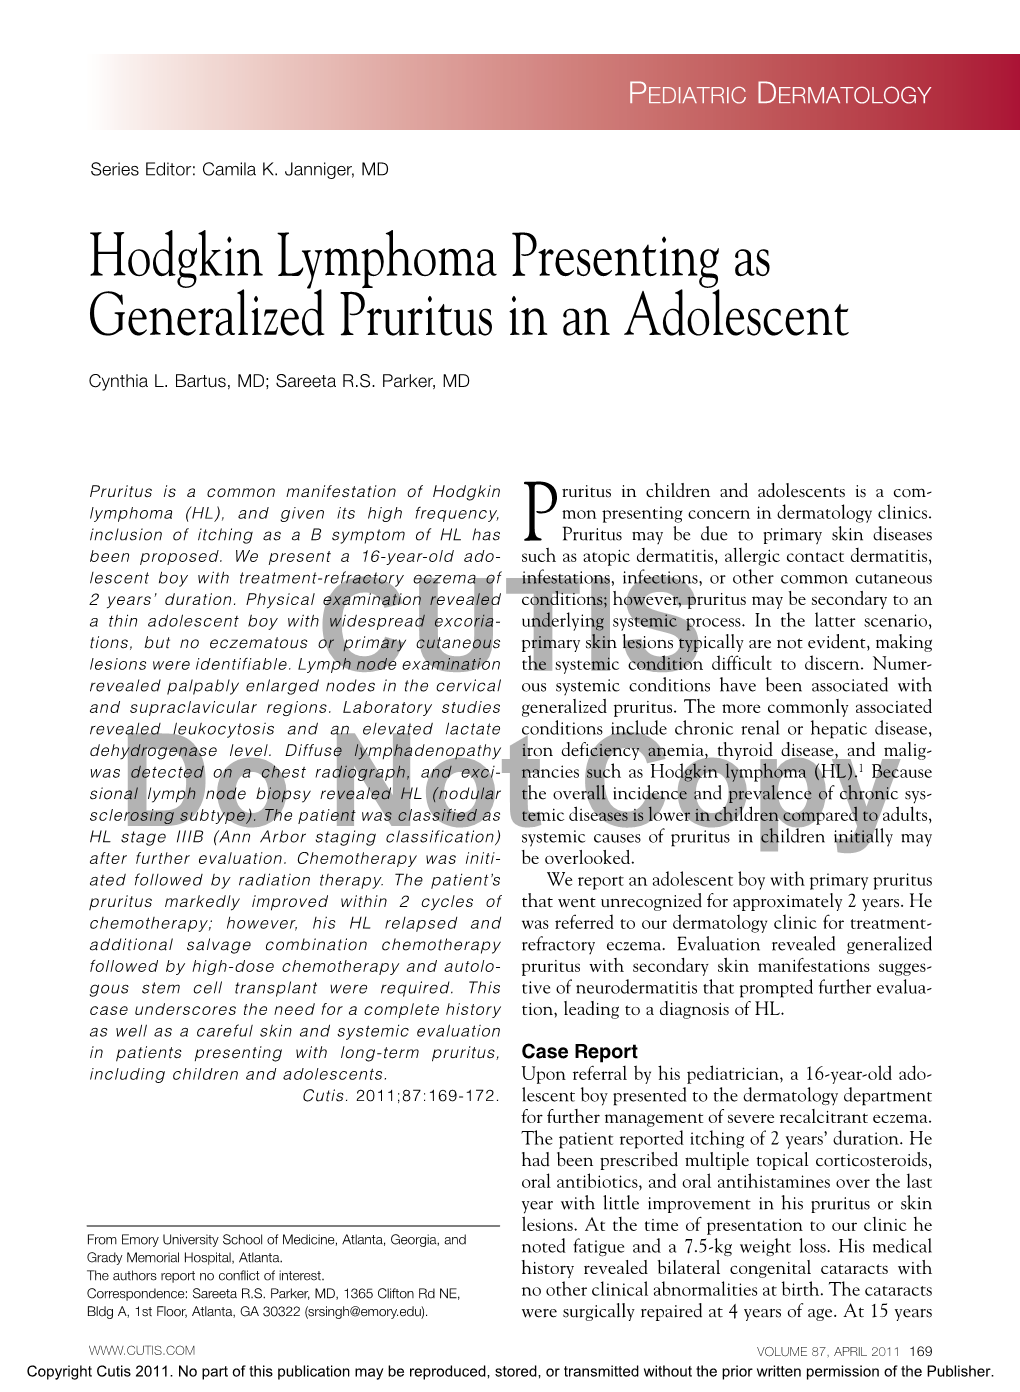 Hodgkin Lymphoma Presenting As Generalized Pruritus in an Adolescent